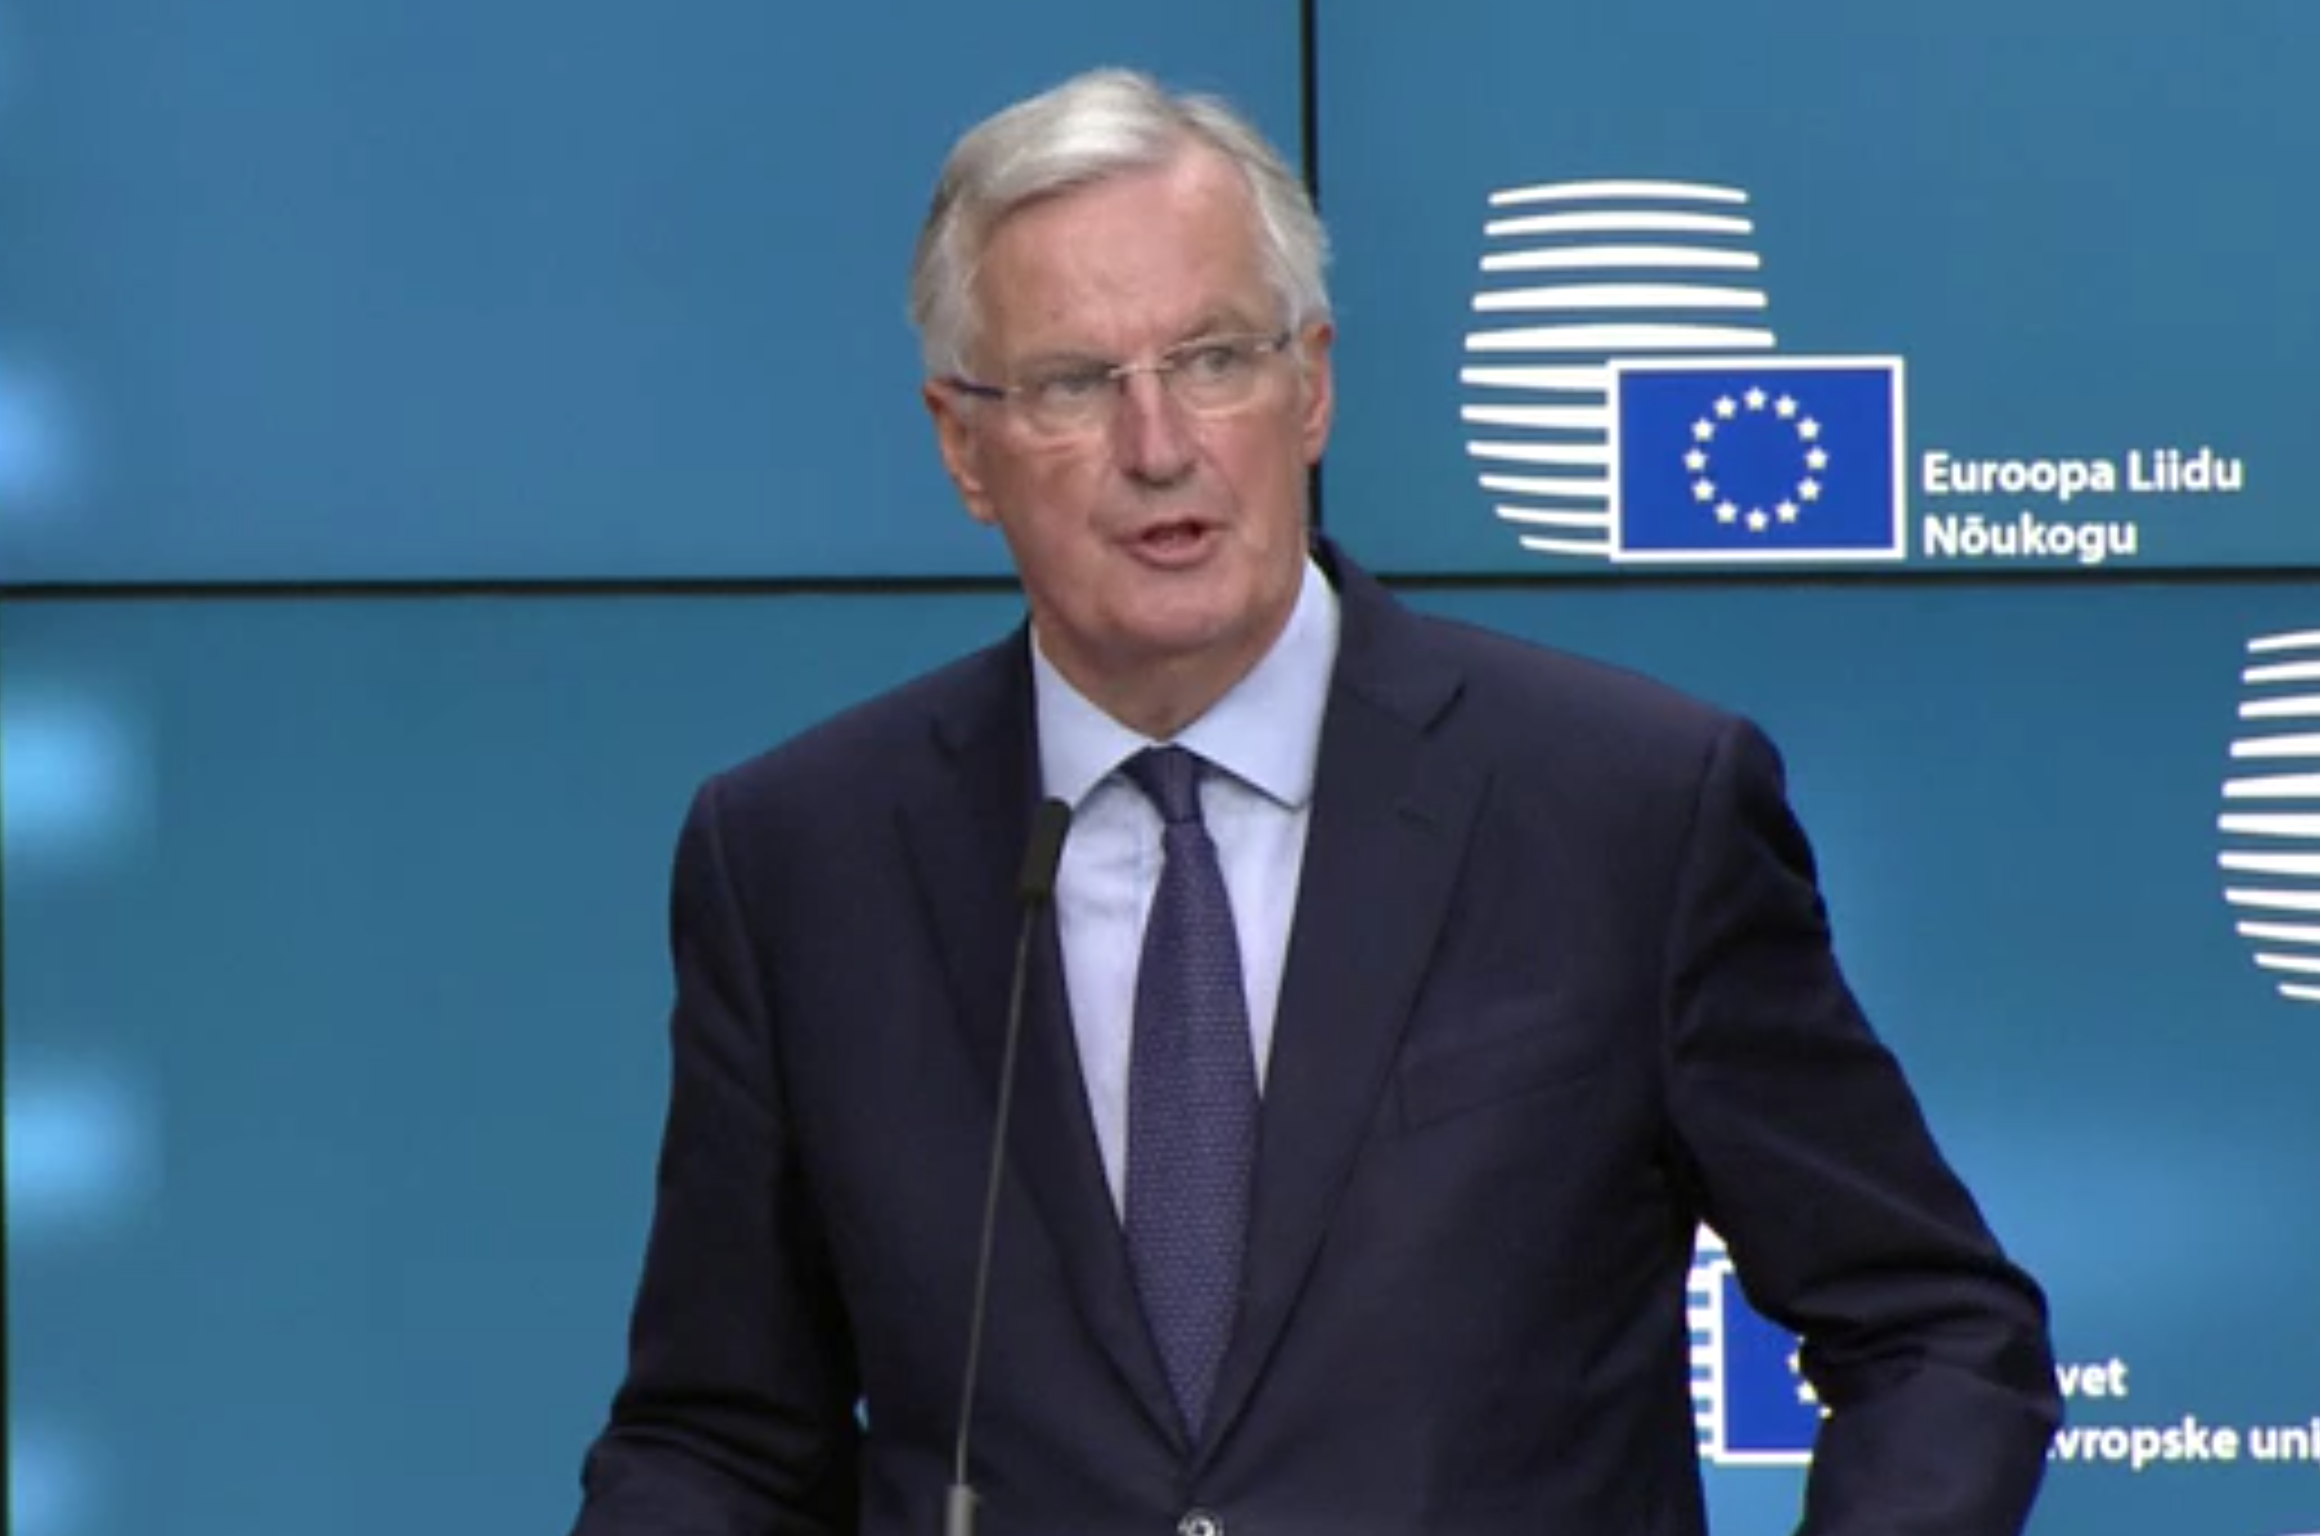 Brexit: EU chief negotiator Michel Barnier takes apart Theresa May&apos;s Chequers white paper plan